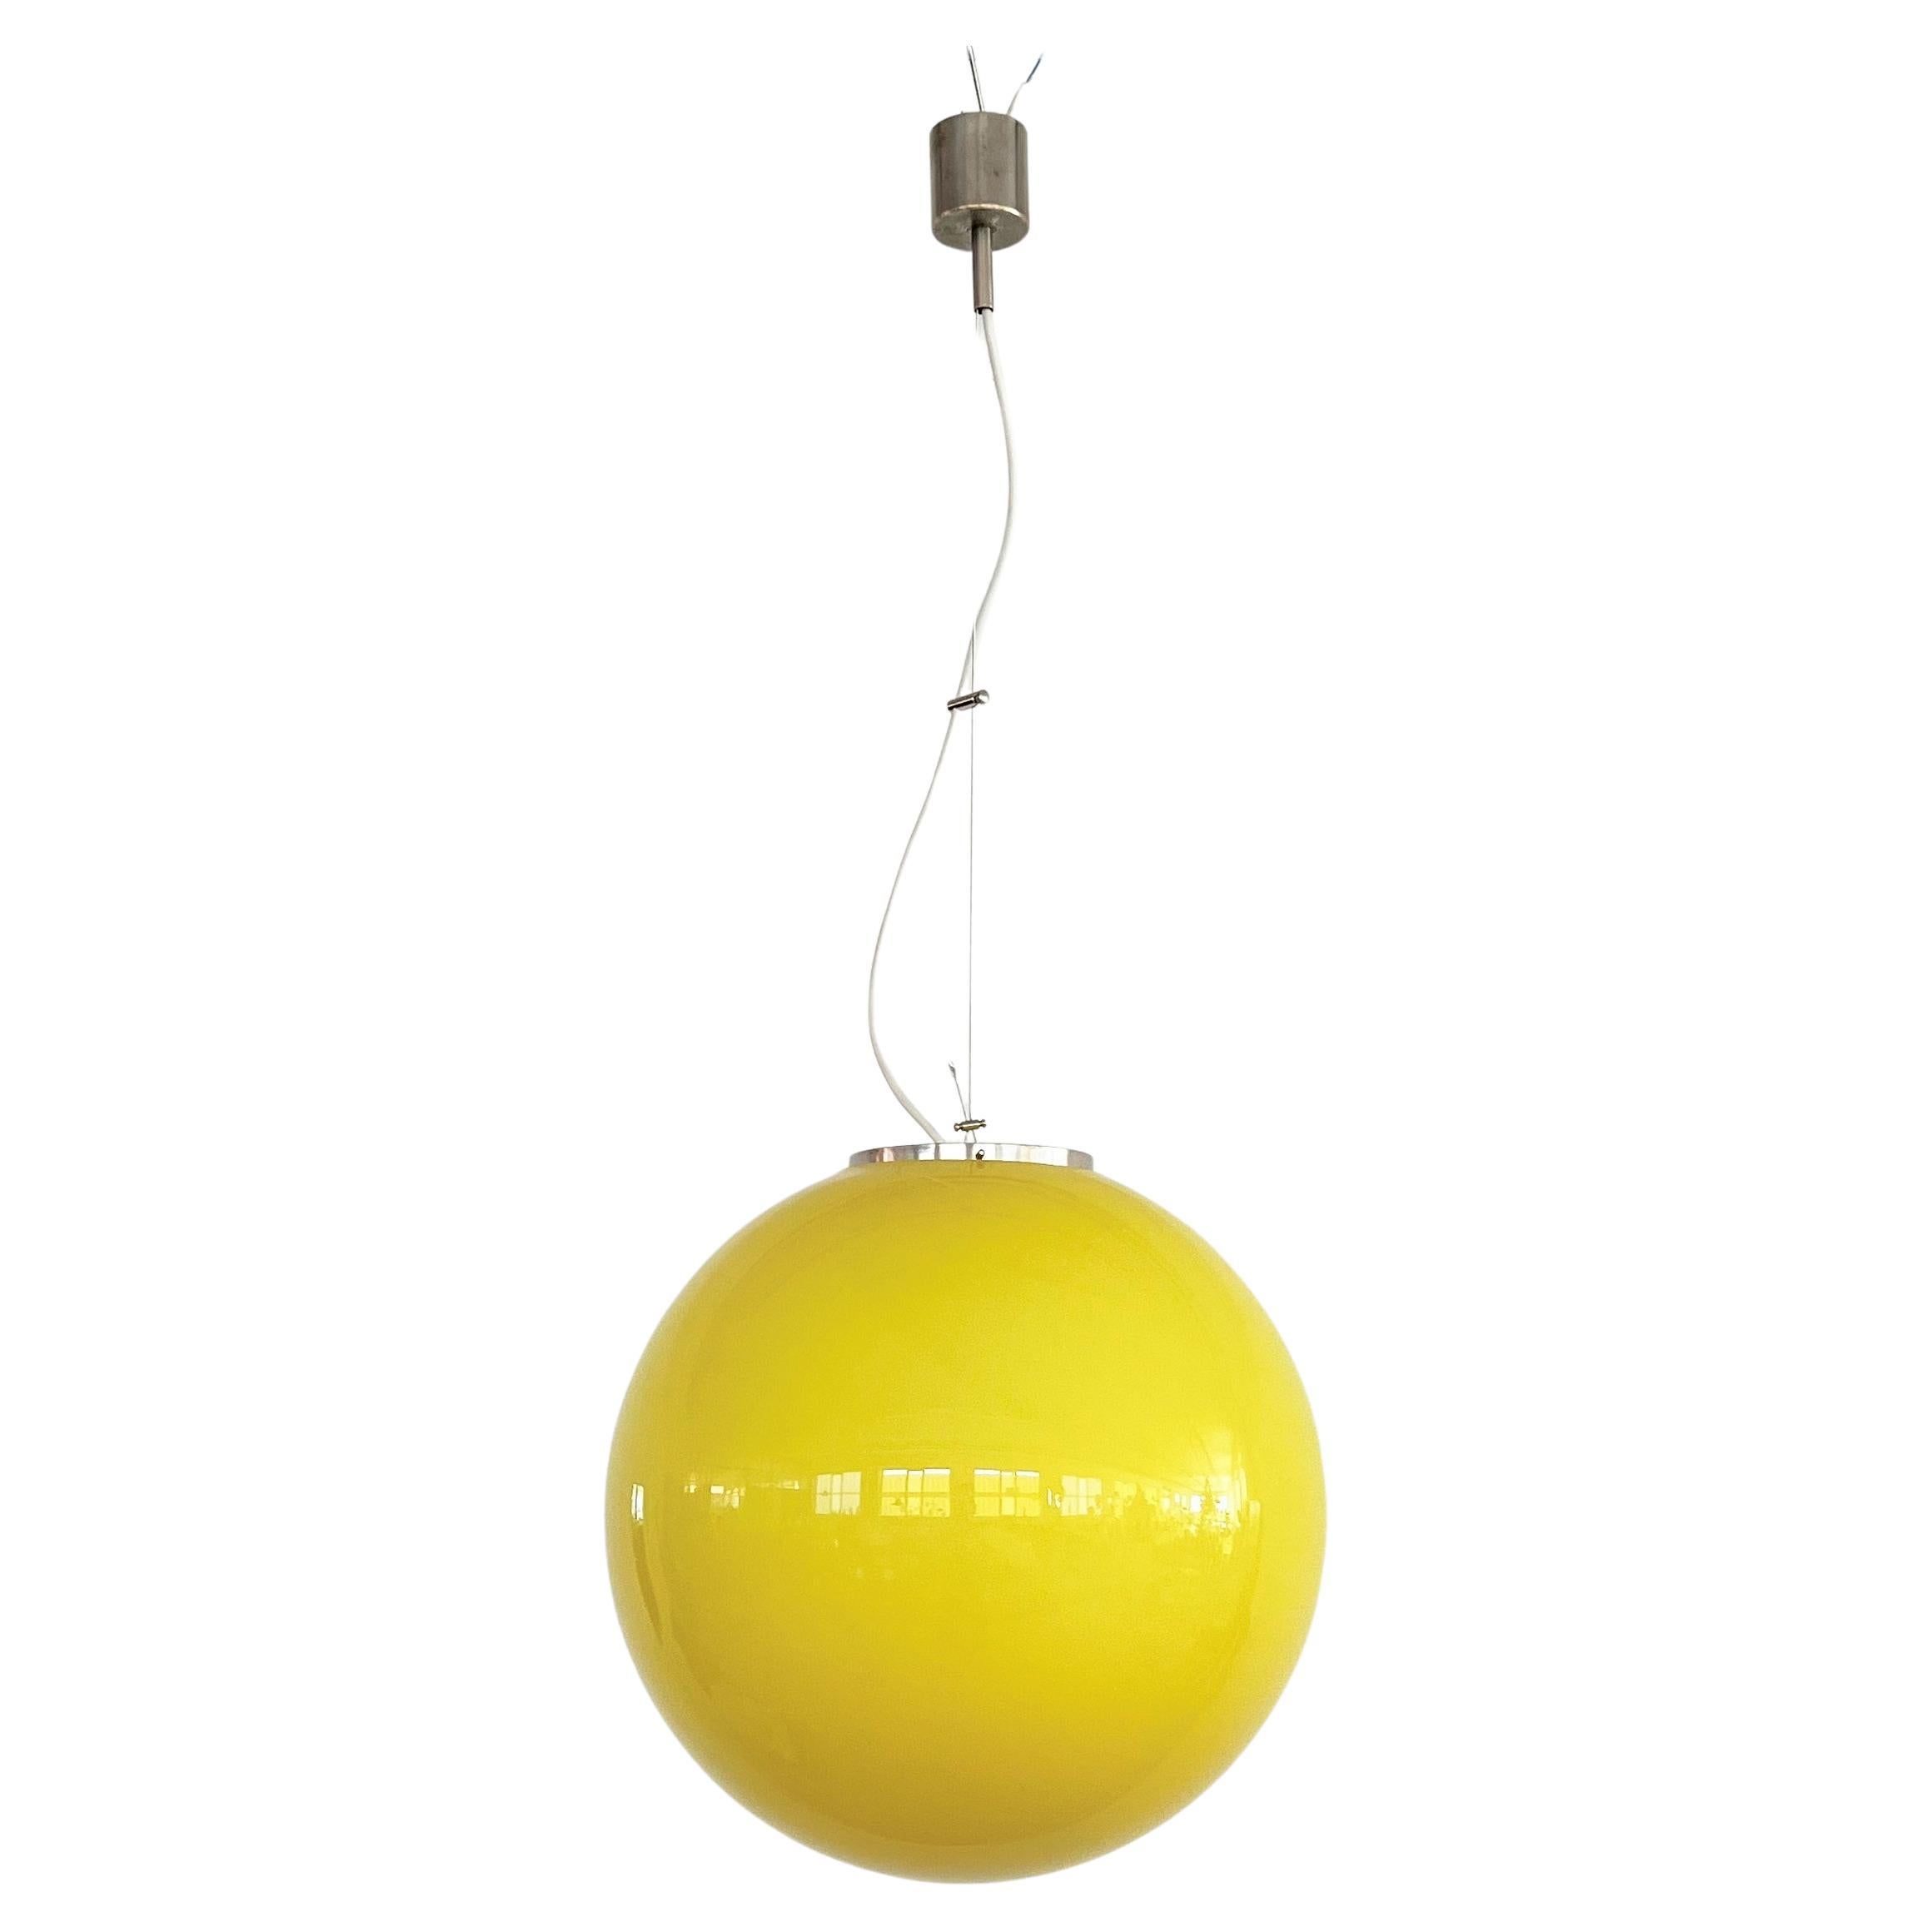 Italian Midcentury Murano Glass Globe Chandelier in Yellow and Plated Brass For Sale